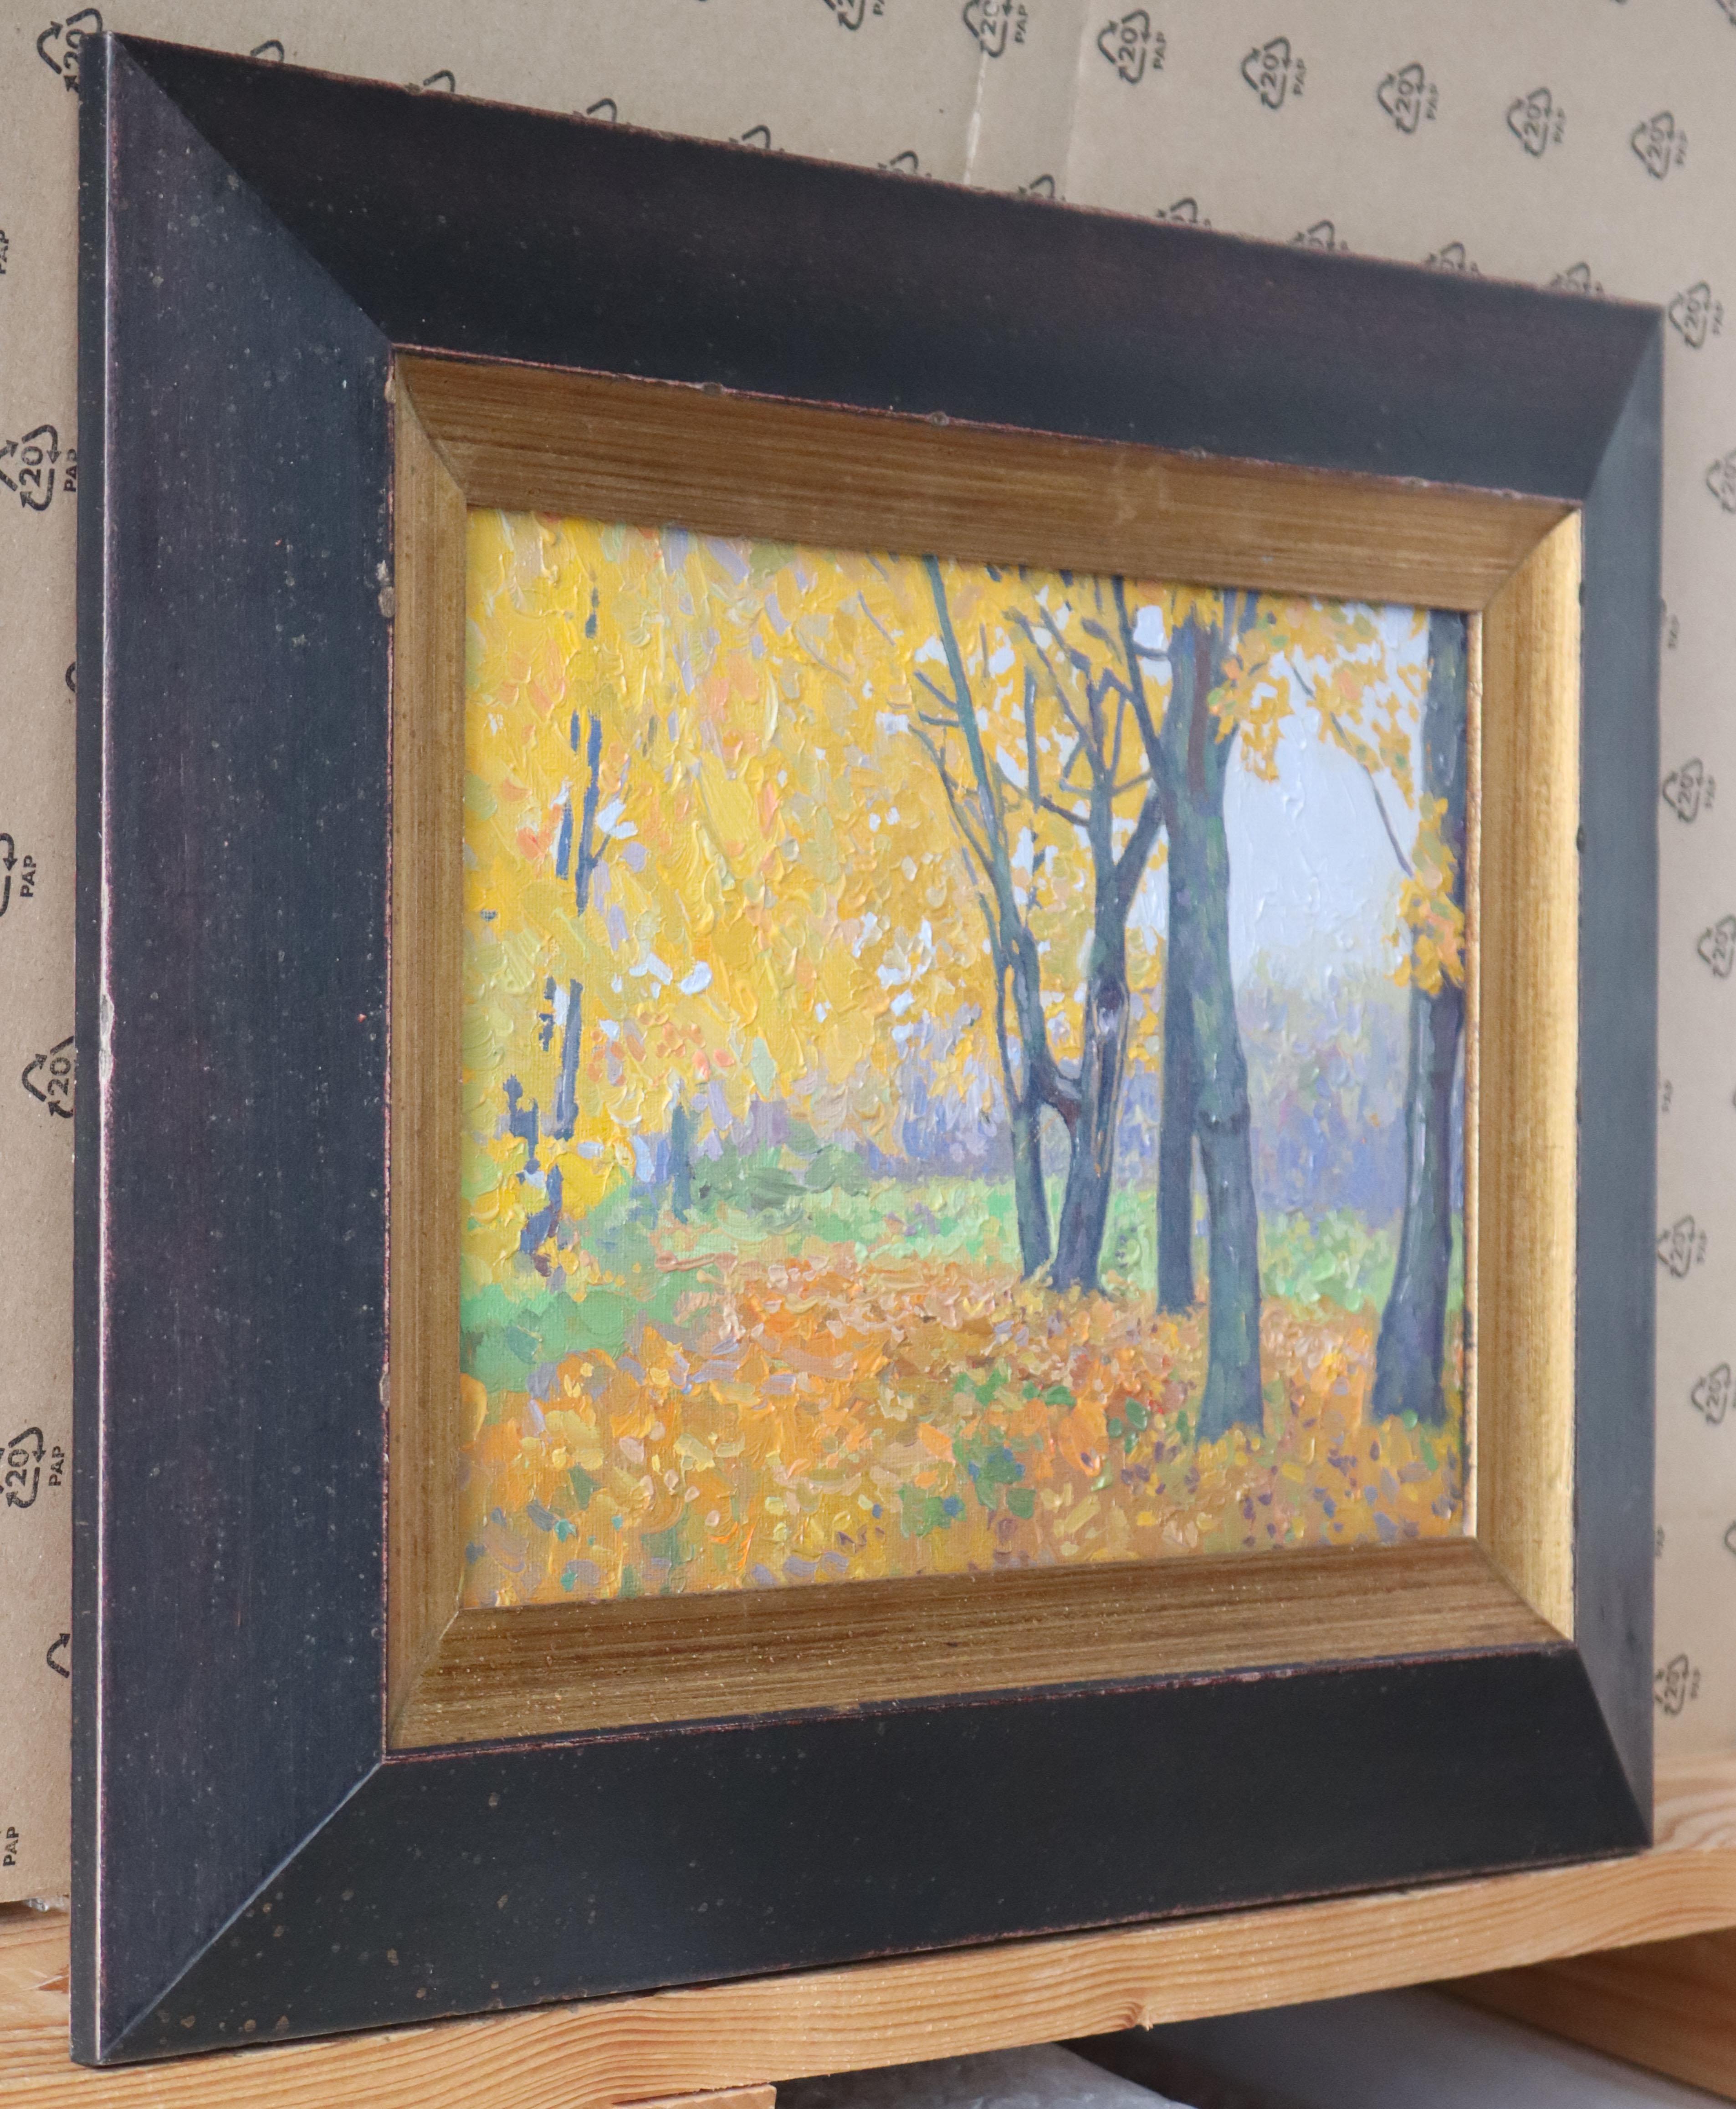 Autumn is a wonderful time when in October the leaves of the trees change color from green to gold and red, purple, orange. I painted this sketch from life in Tsaritsyno Park and tried to convey the bright changes in nature, where the golden shades